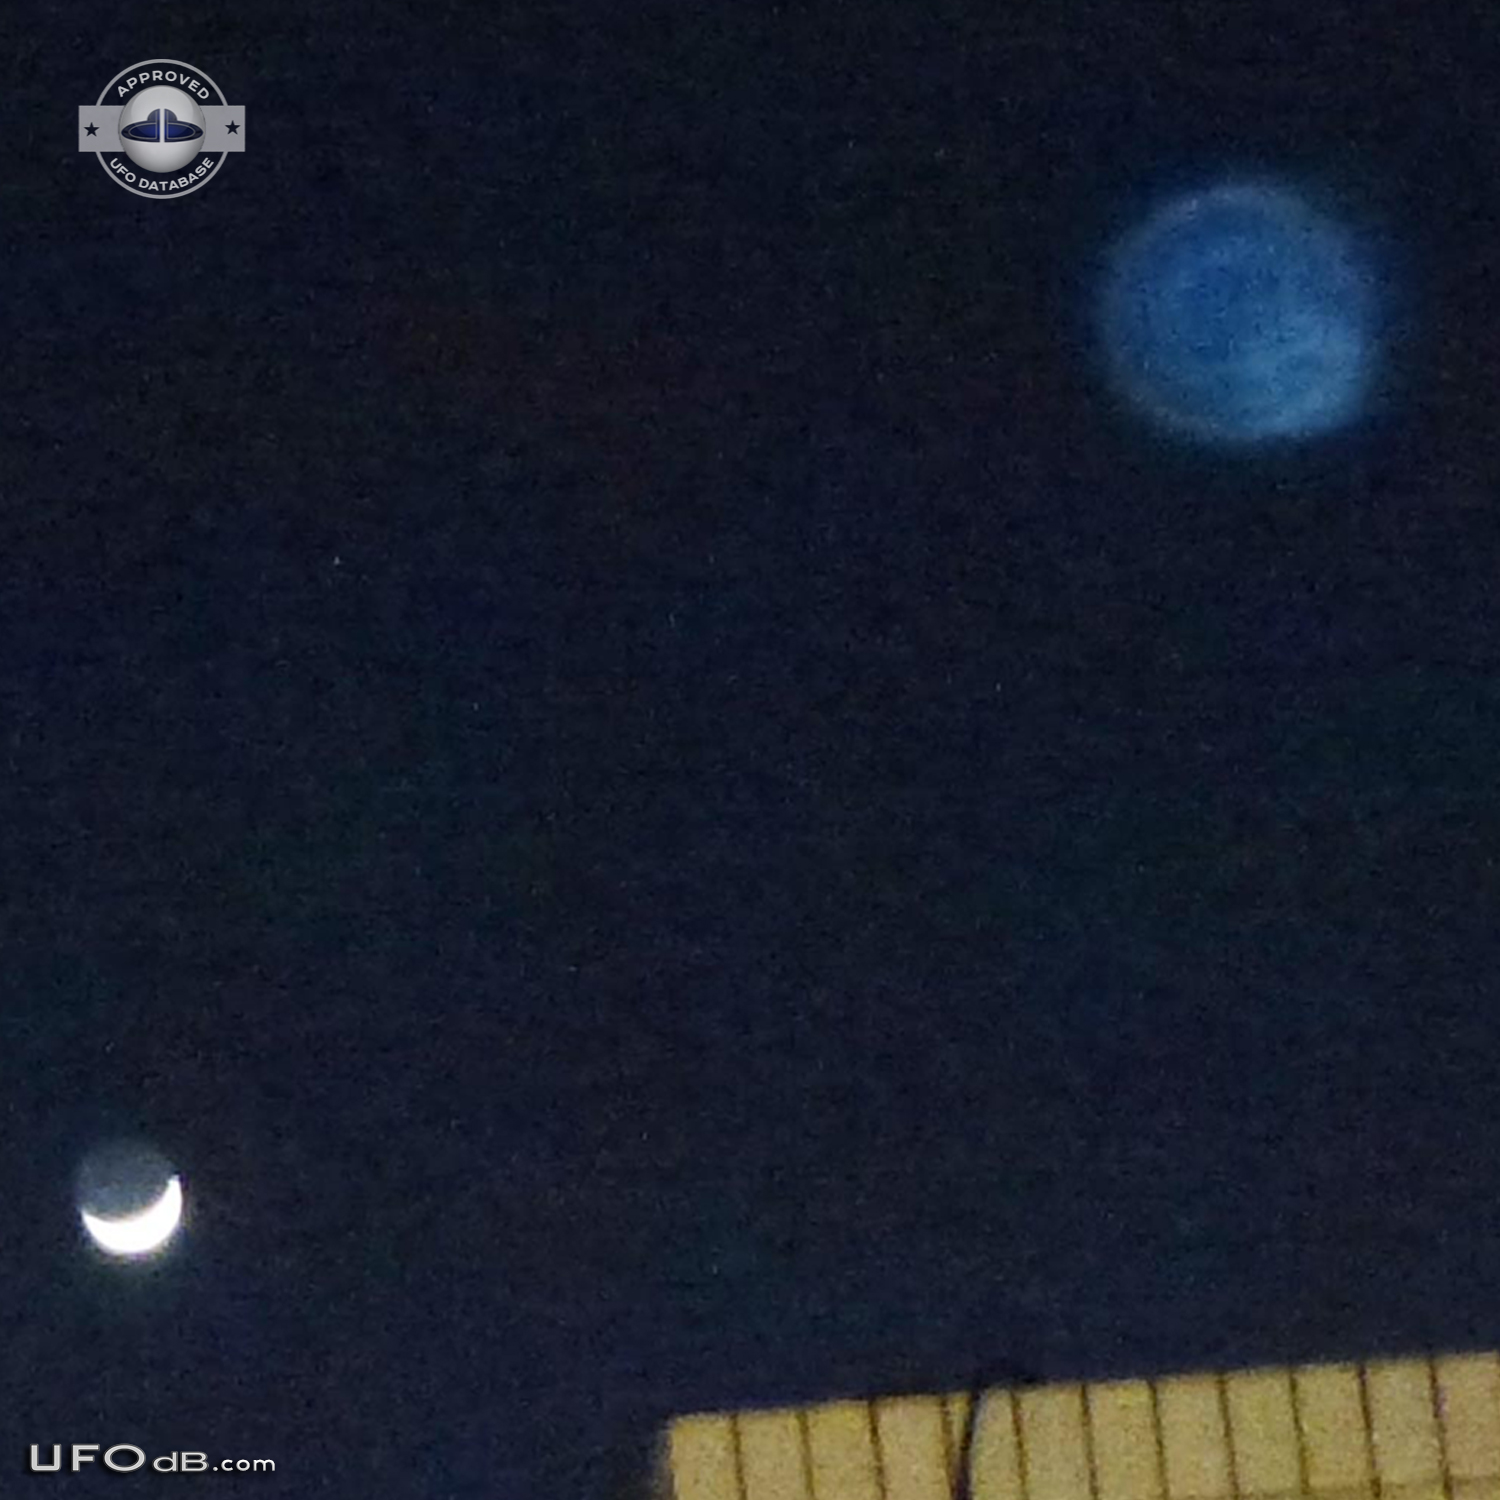 Blue round UFO appears on photo over buildings - Catalonia, Spain 2012 UFO Picture #407-3